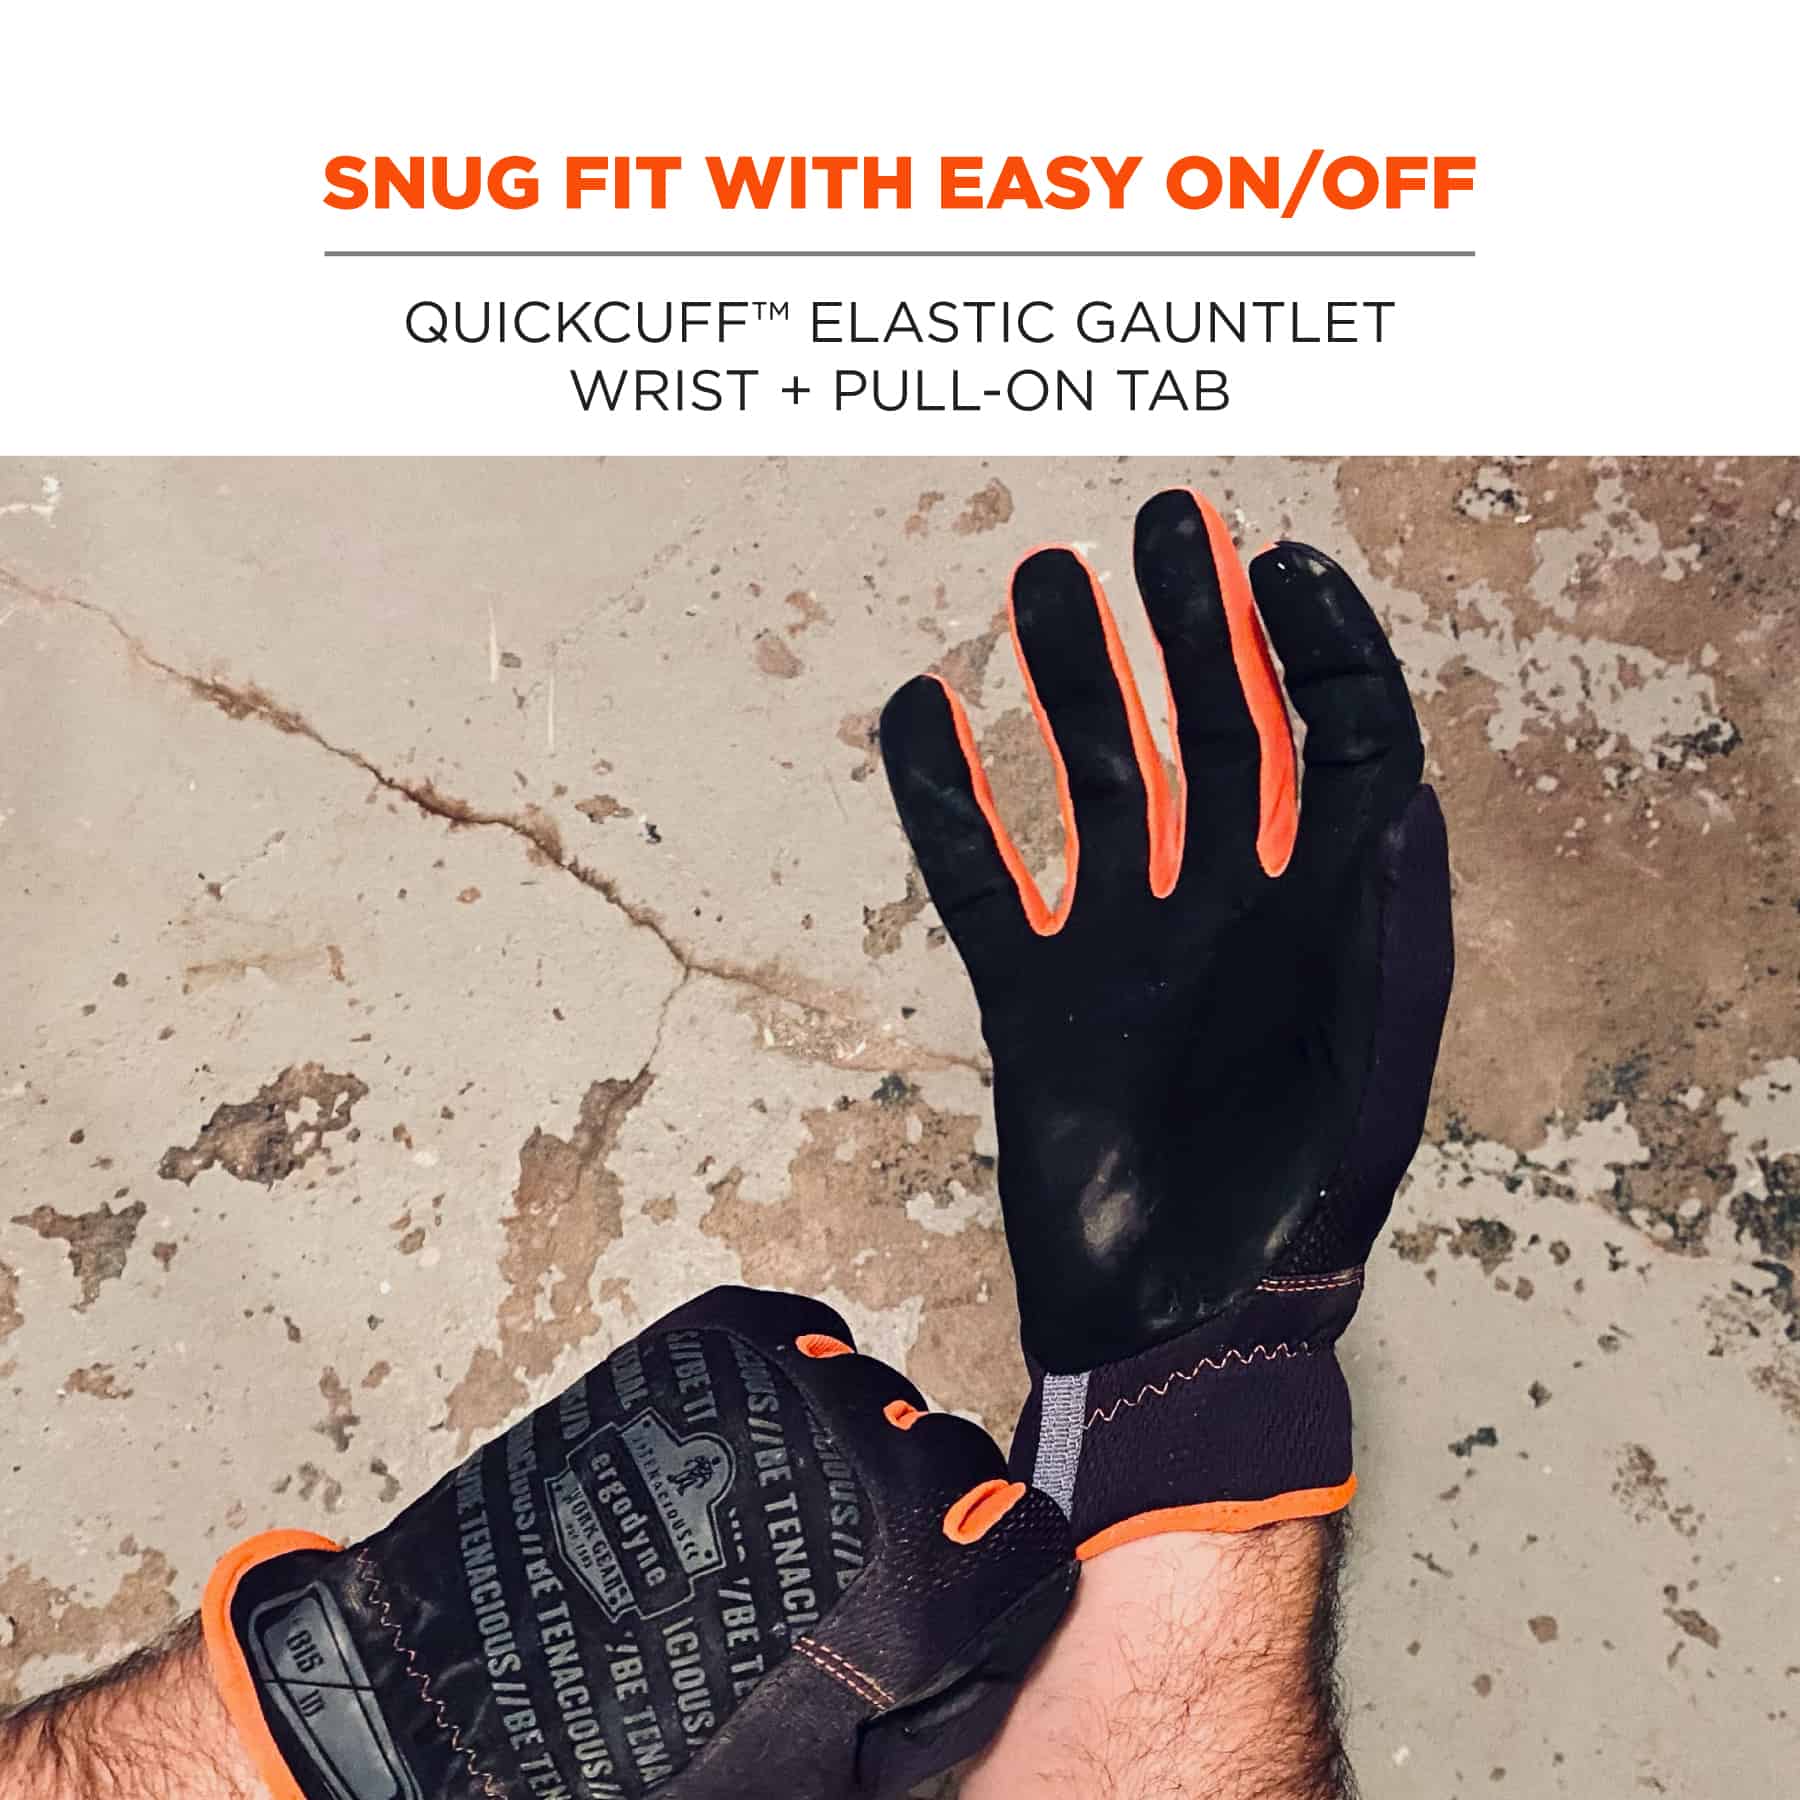 https://www.ergodyne.com/sites/default/files/product-images/17202-815-quickcuff-utility-gloves-snug-fit-with-easy-on-off.jpg